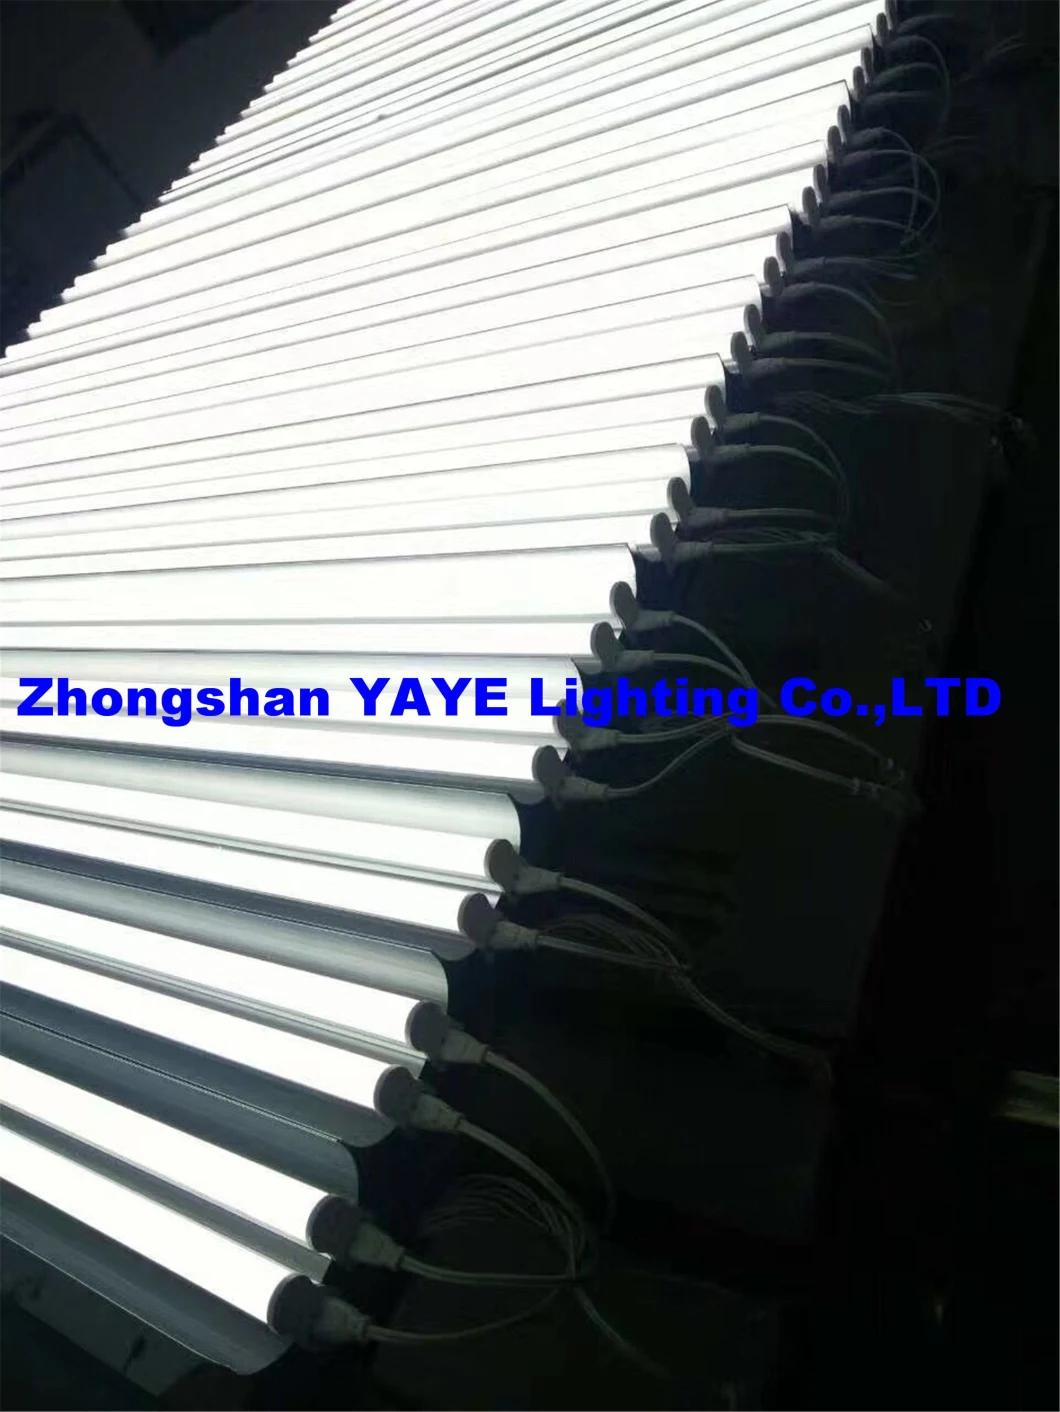 Yaye 18 Hot Sell Good Quliaty Ce/RoHS 0.6m/0.9m/1.2/1.5m T8 LED Tube Light with 2 Years Warranty